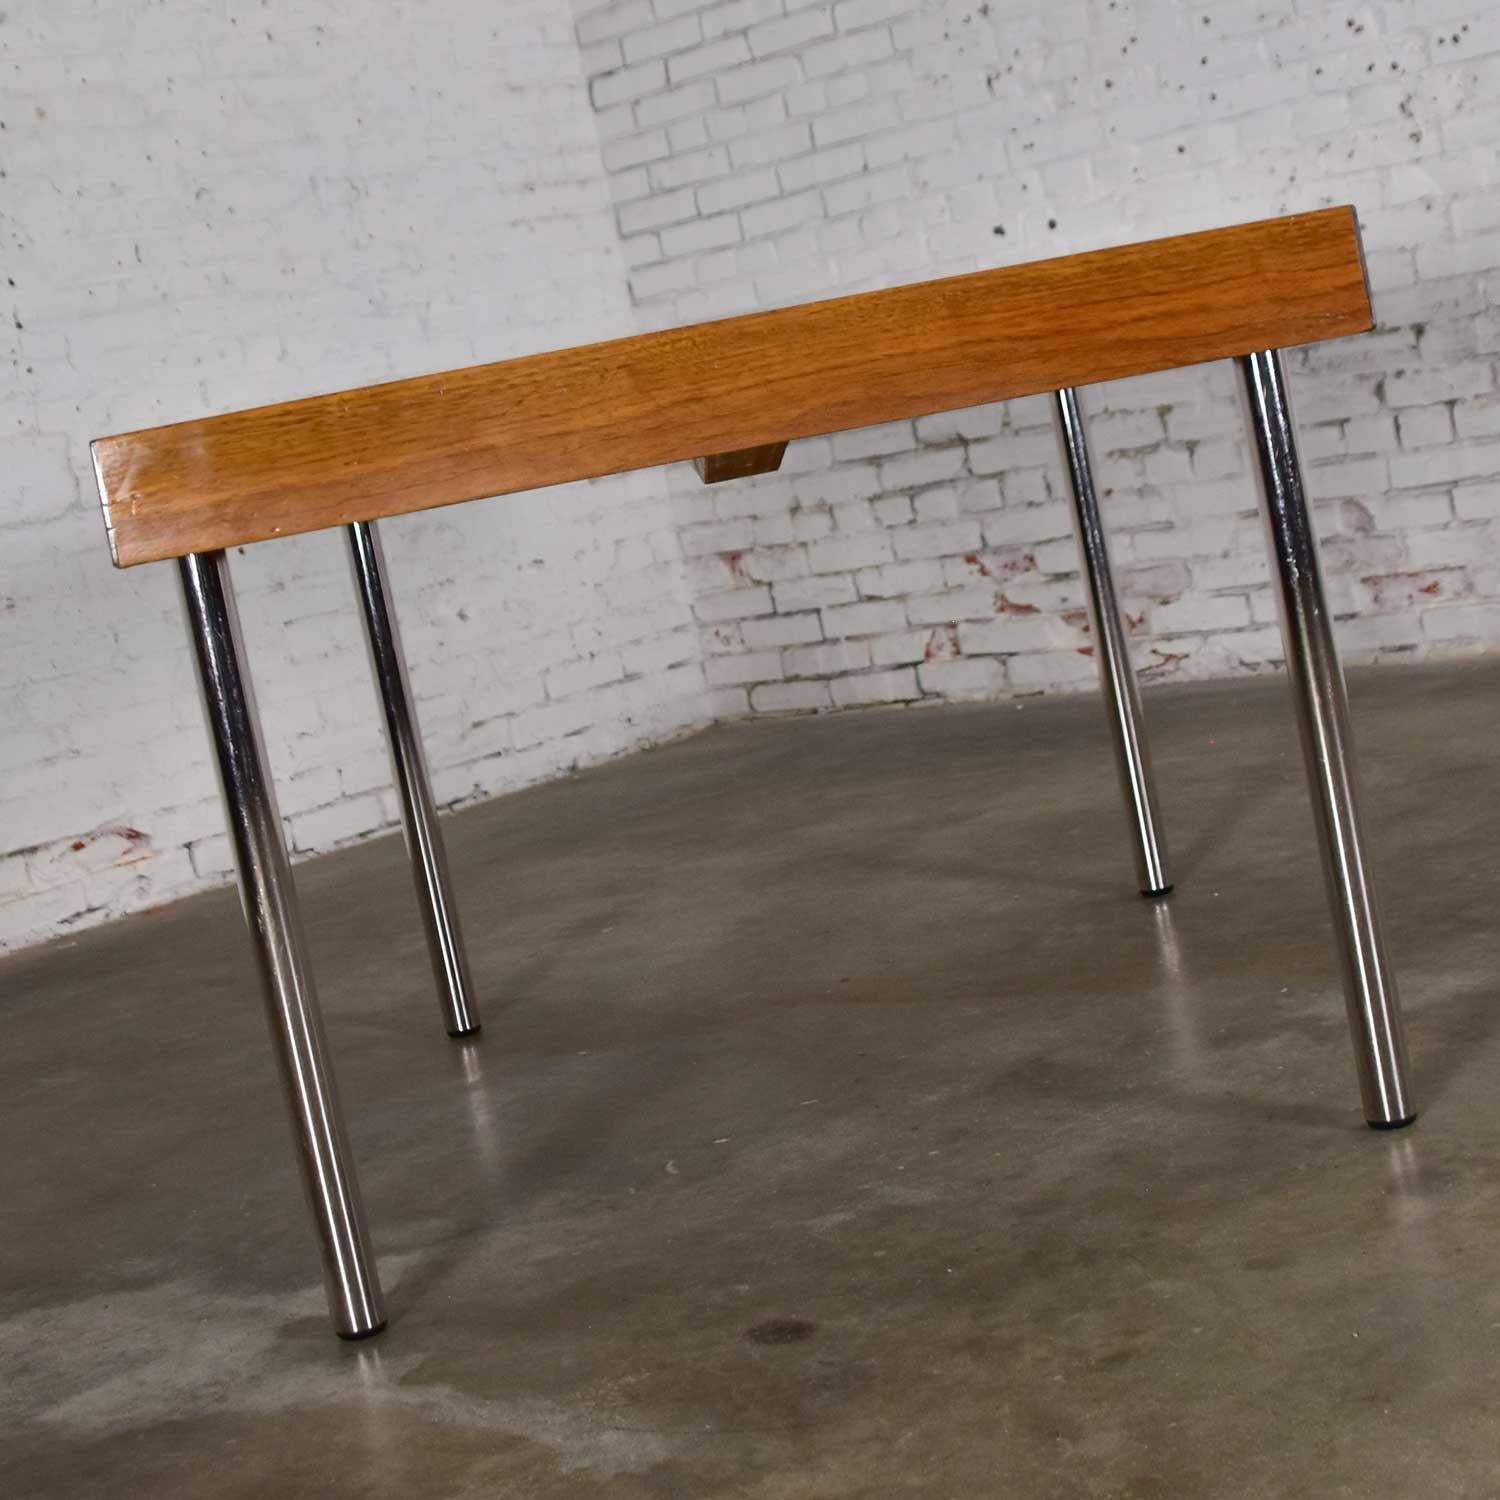 Modern Walnut & Chrome Boat Shape Dining Conference Table by Jens Risom for Howe In Good Condition For Sale In Topeka, KS